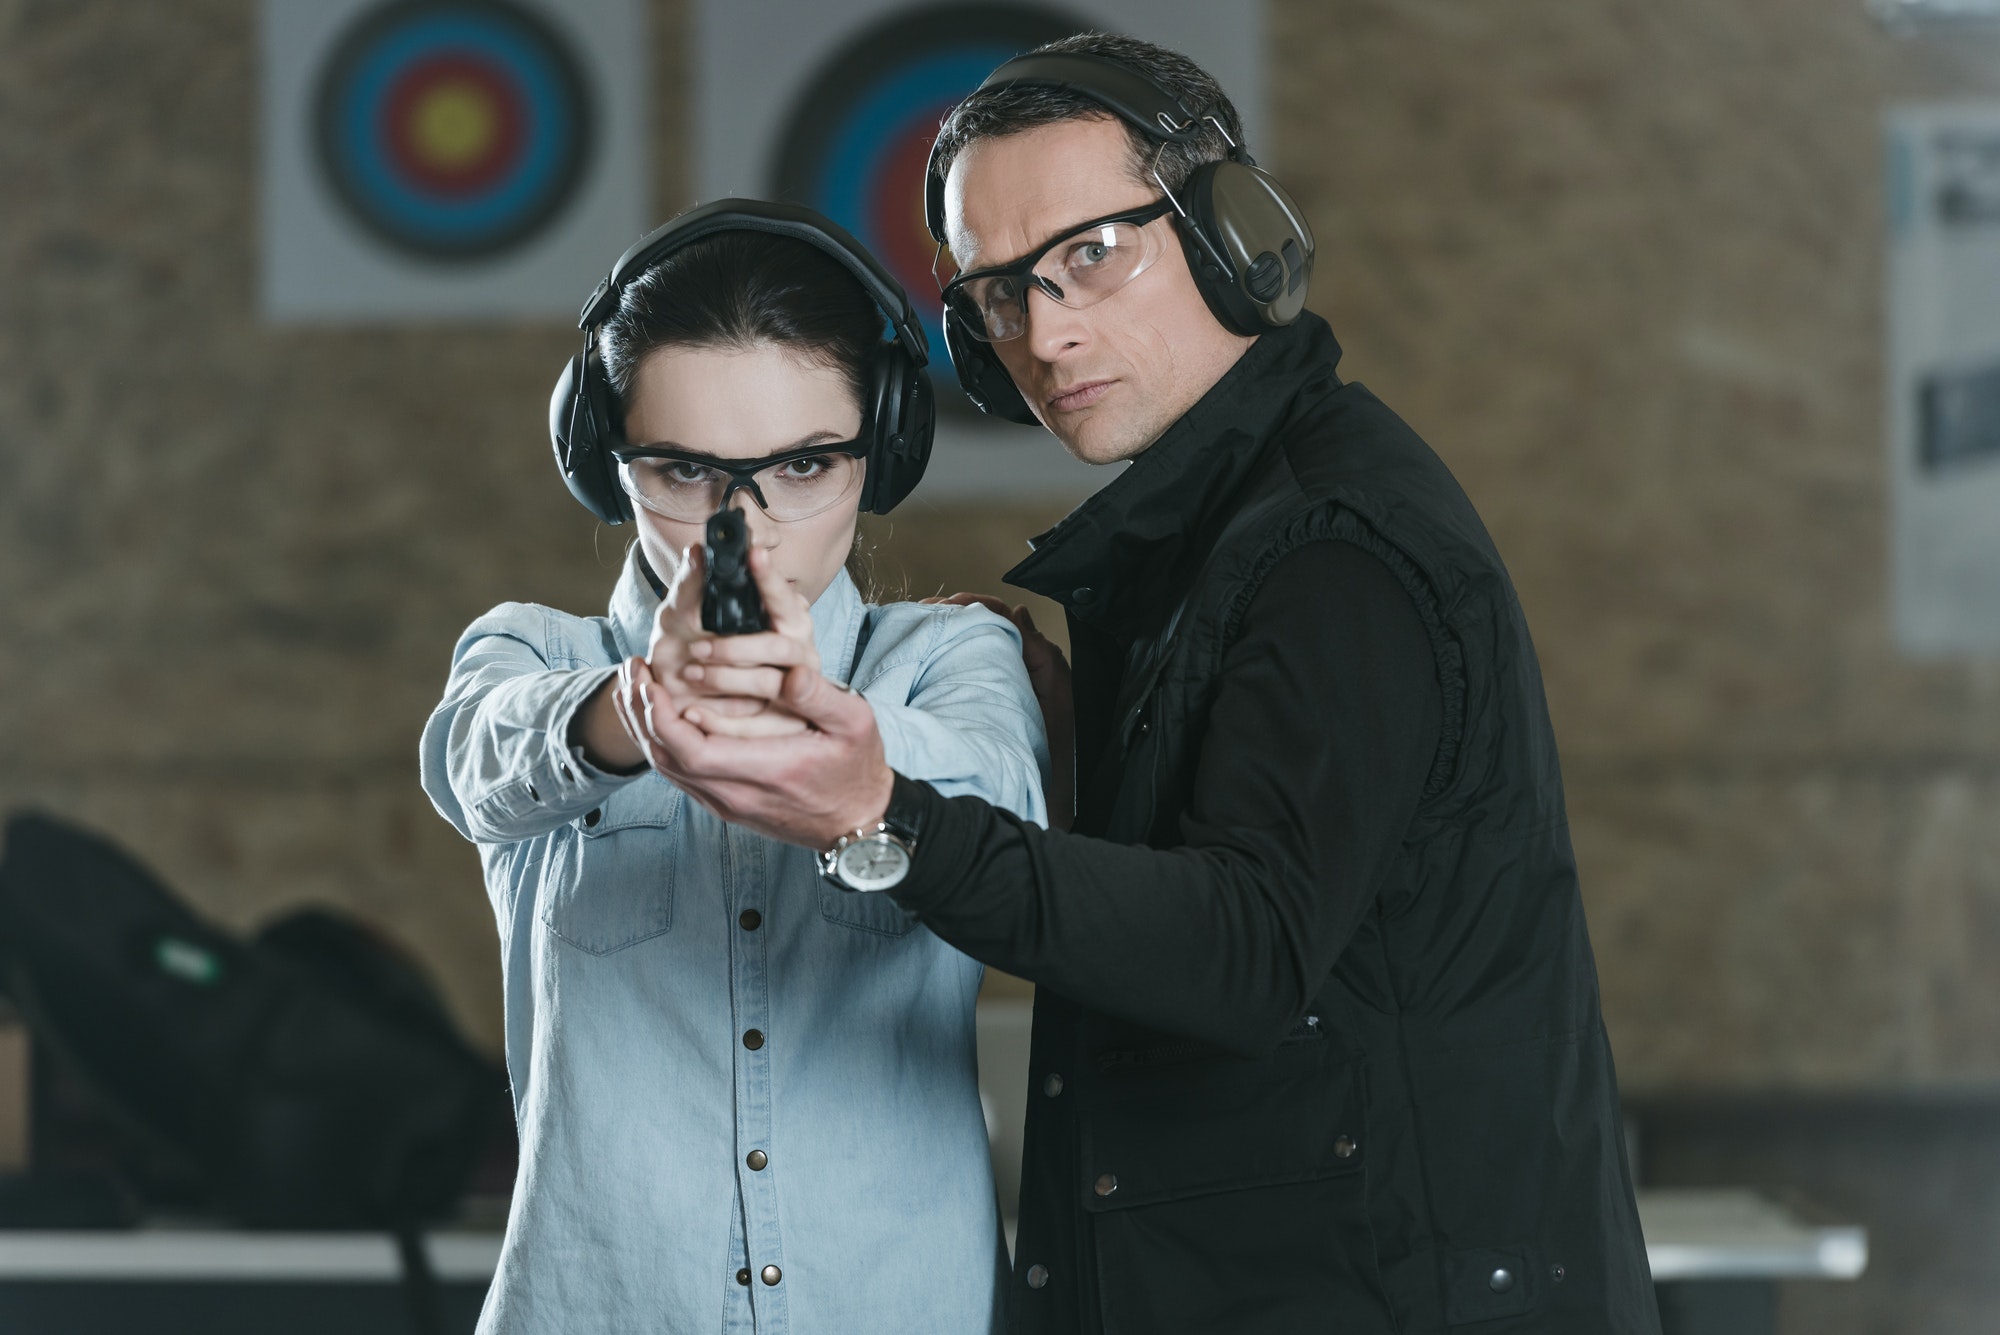 YGC: Home of the Most Qualified Firearms Instructors